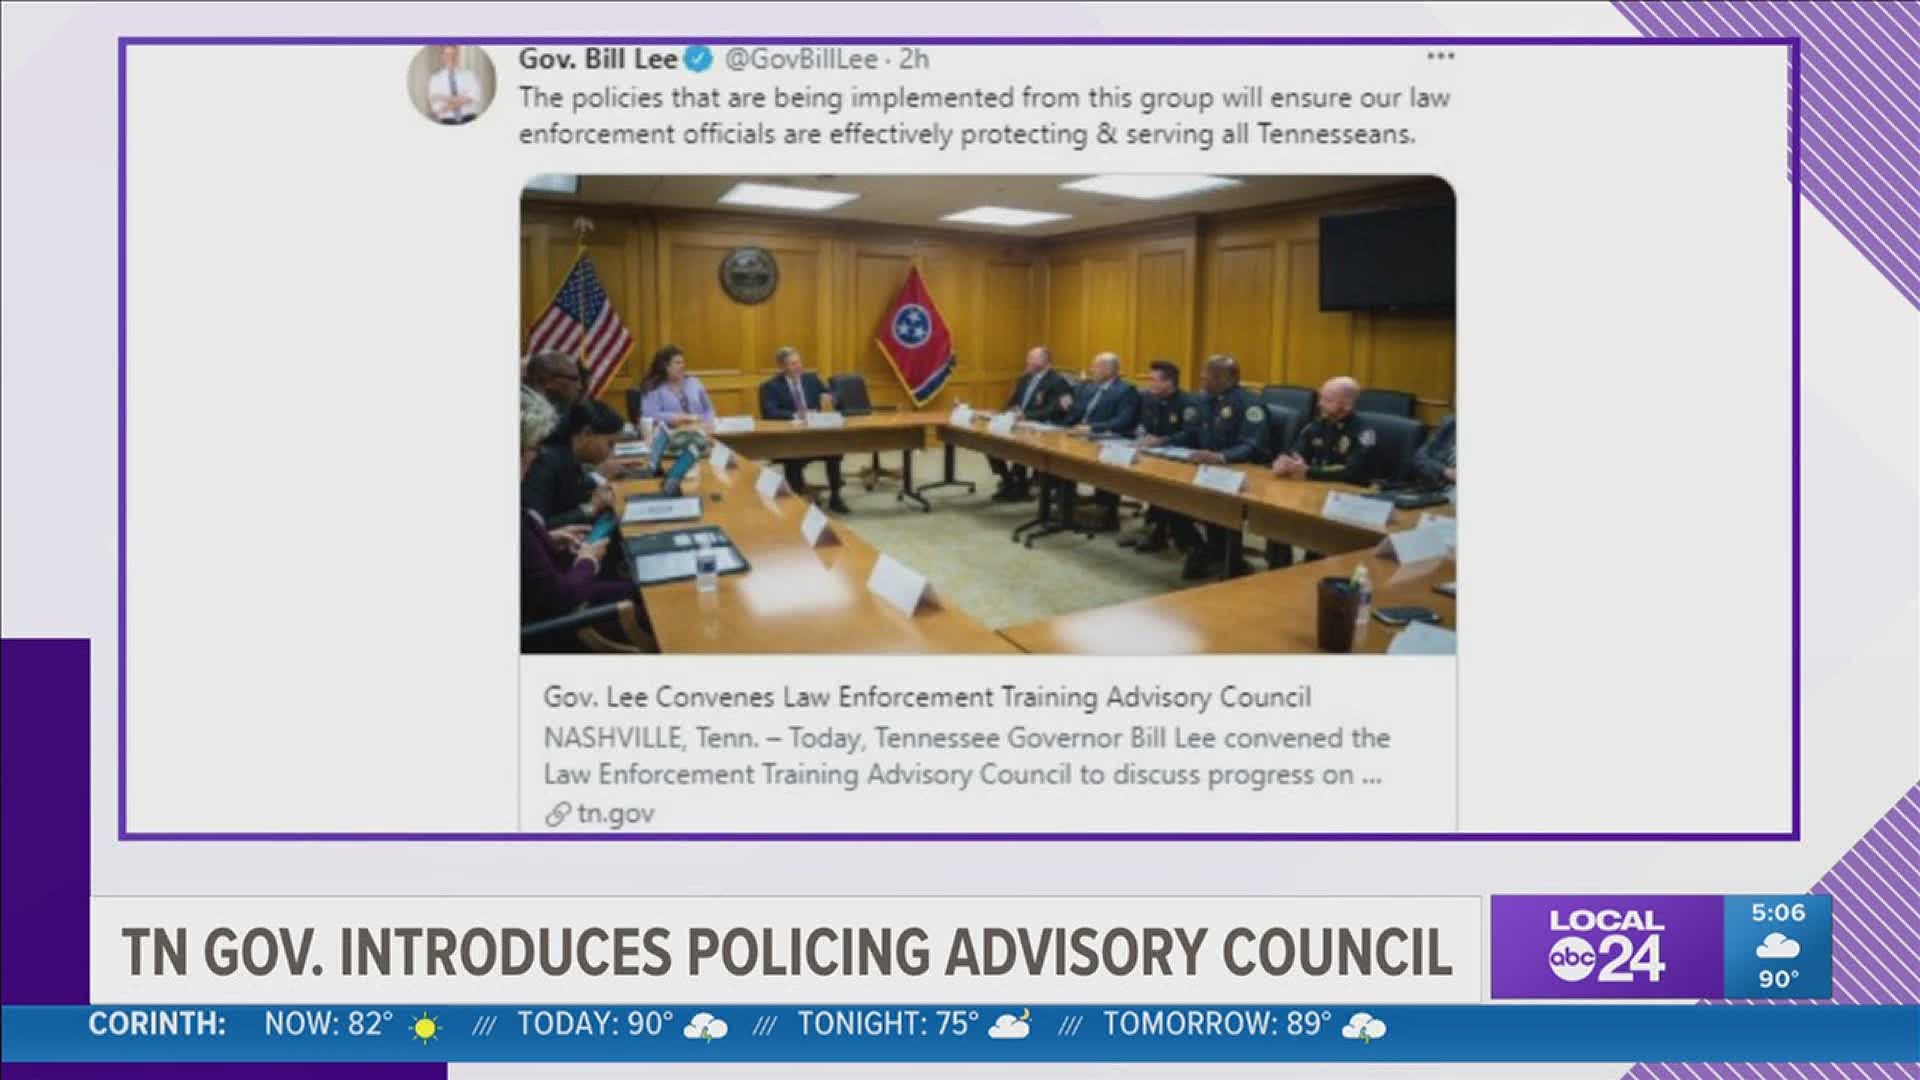 The council meeting comes as parts of Tennessee deal with a surge in violent crime, especially in the city of Memphis.